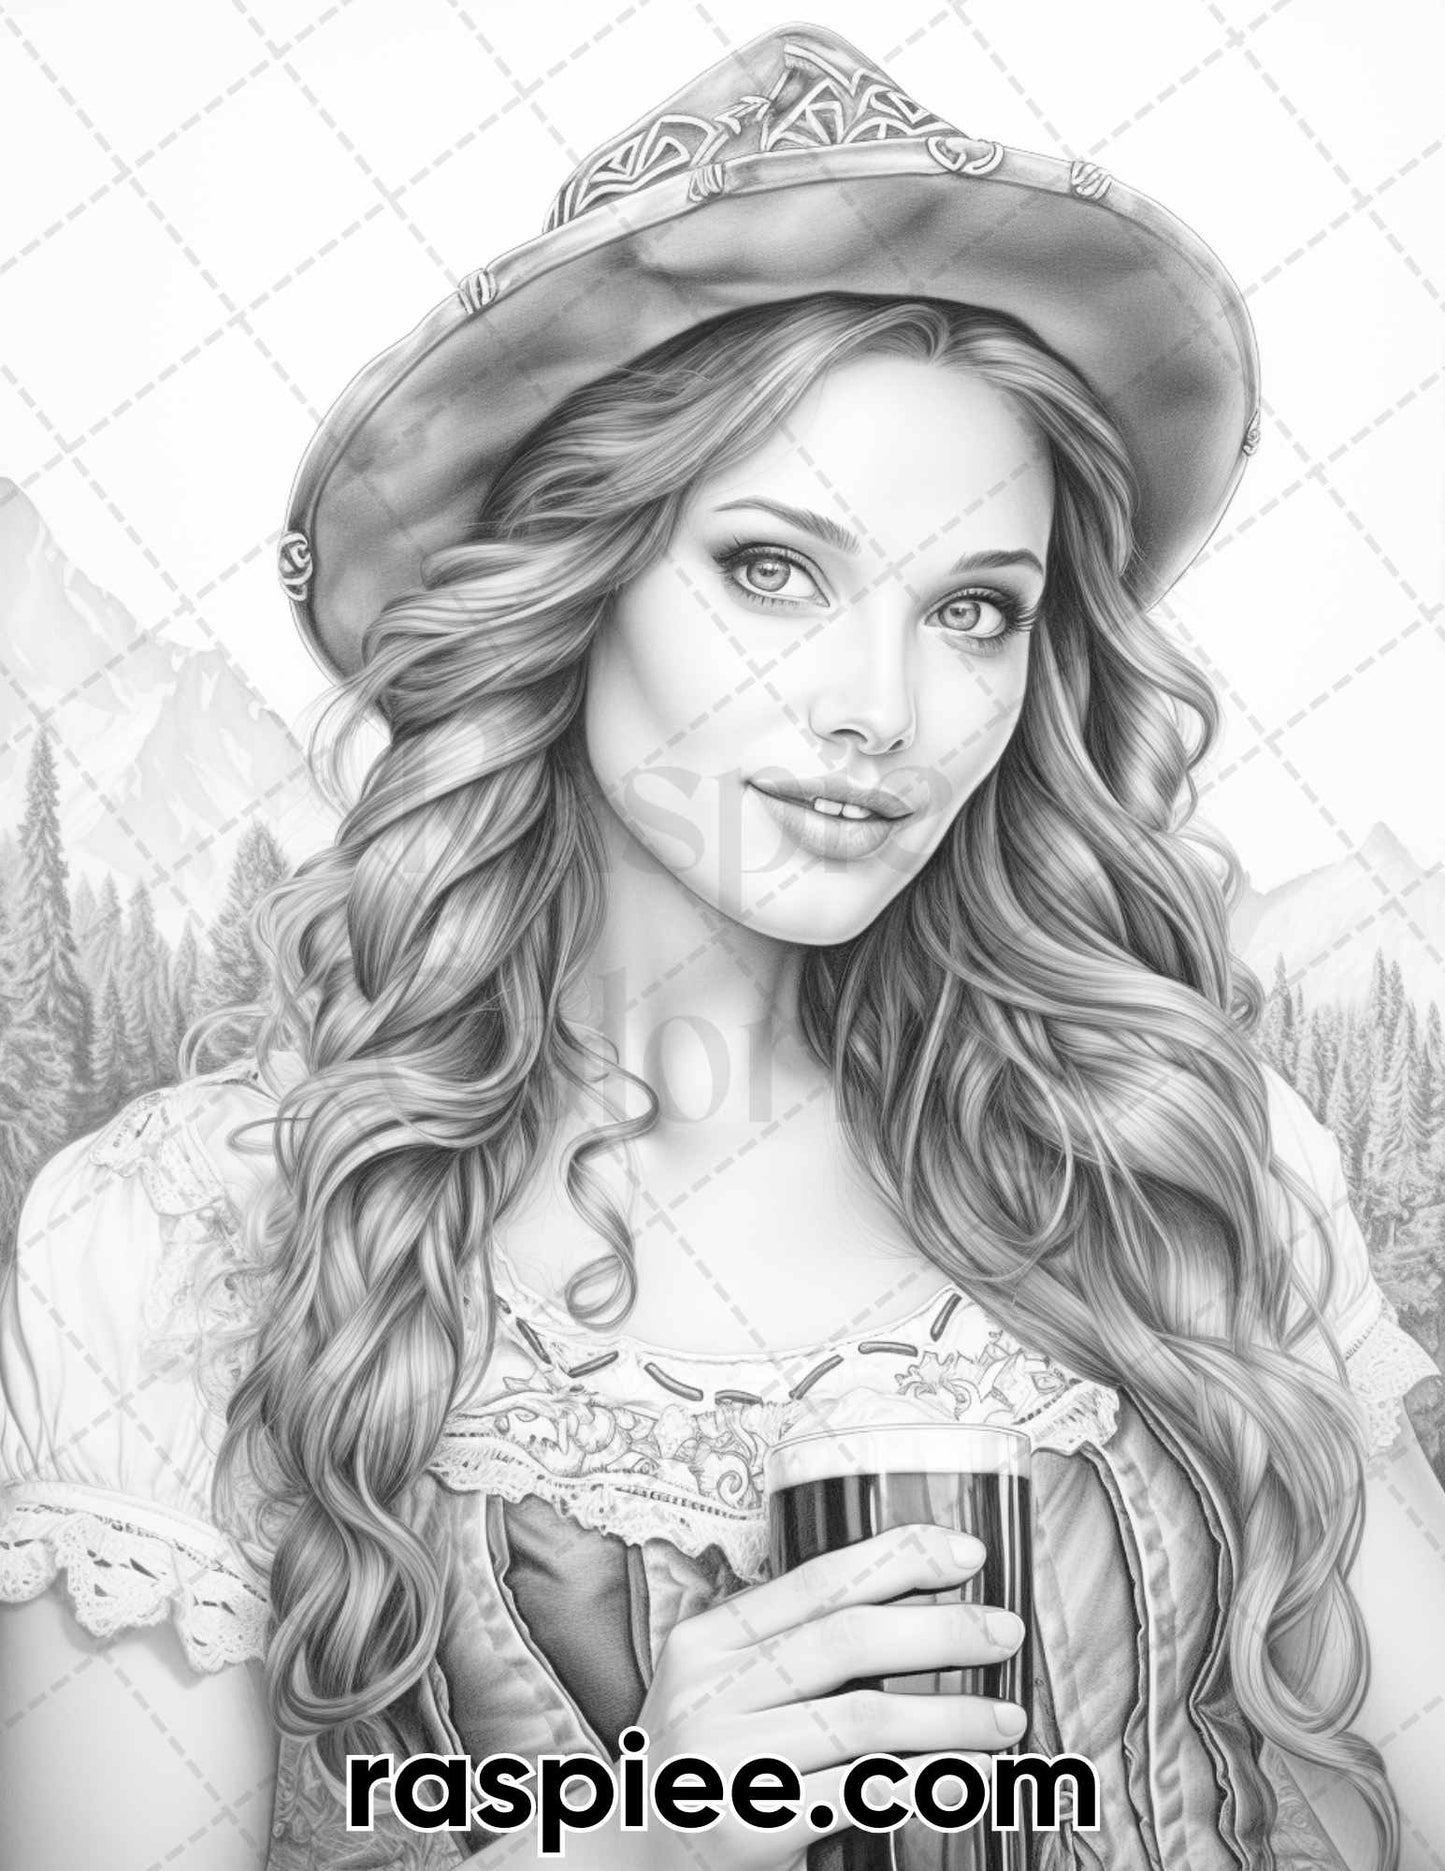 Oktoberfest girls grayscale coloring pages, adult coloring pages, german coloring pages, portrait coloring pages for adults, portrait coloring book printable, portrait coloring sheets